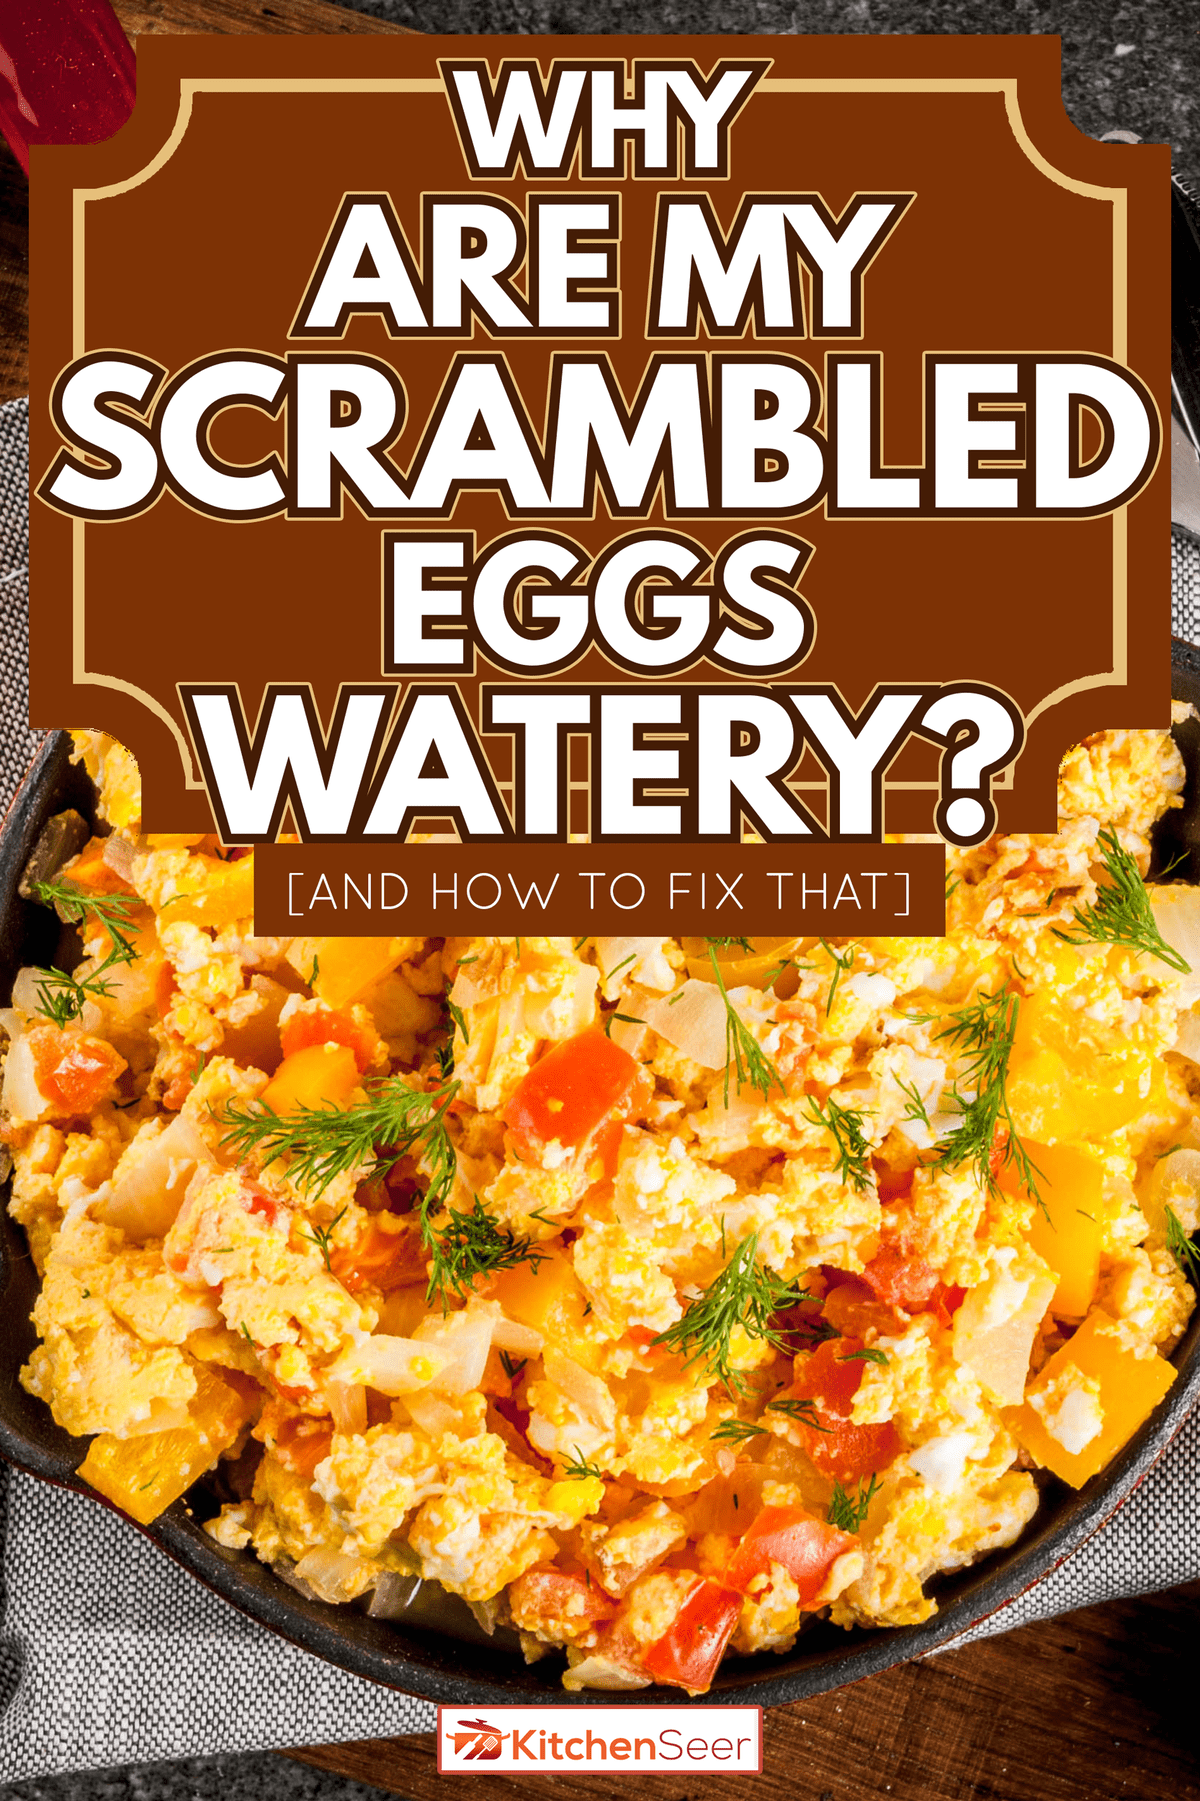 Why Are My Scrambled Eggs Watery? [And How To Fix That]